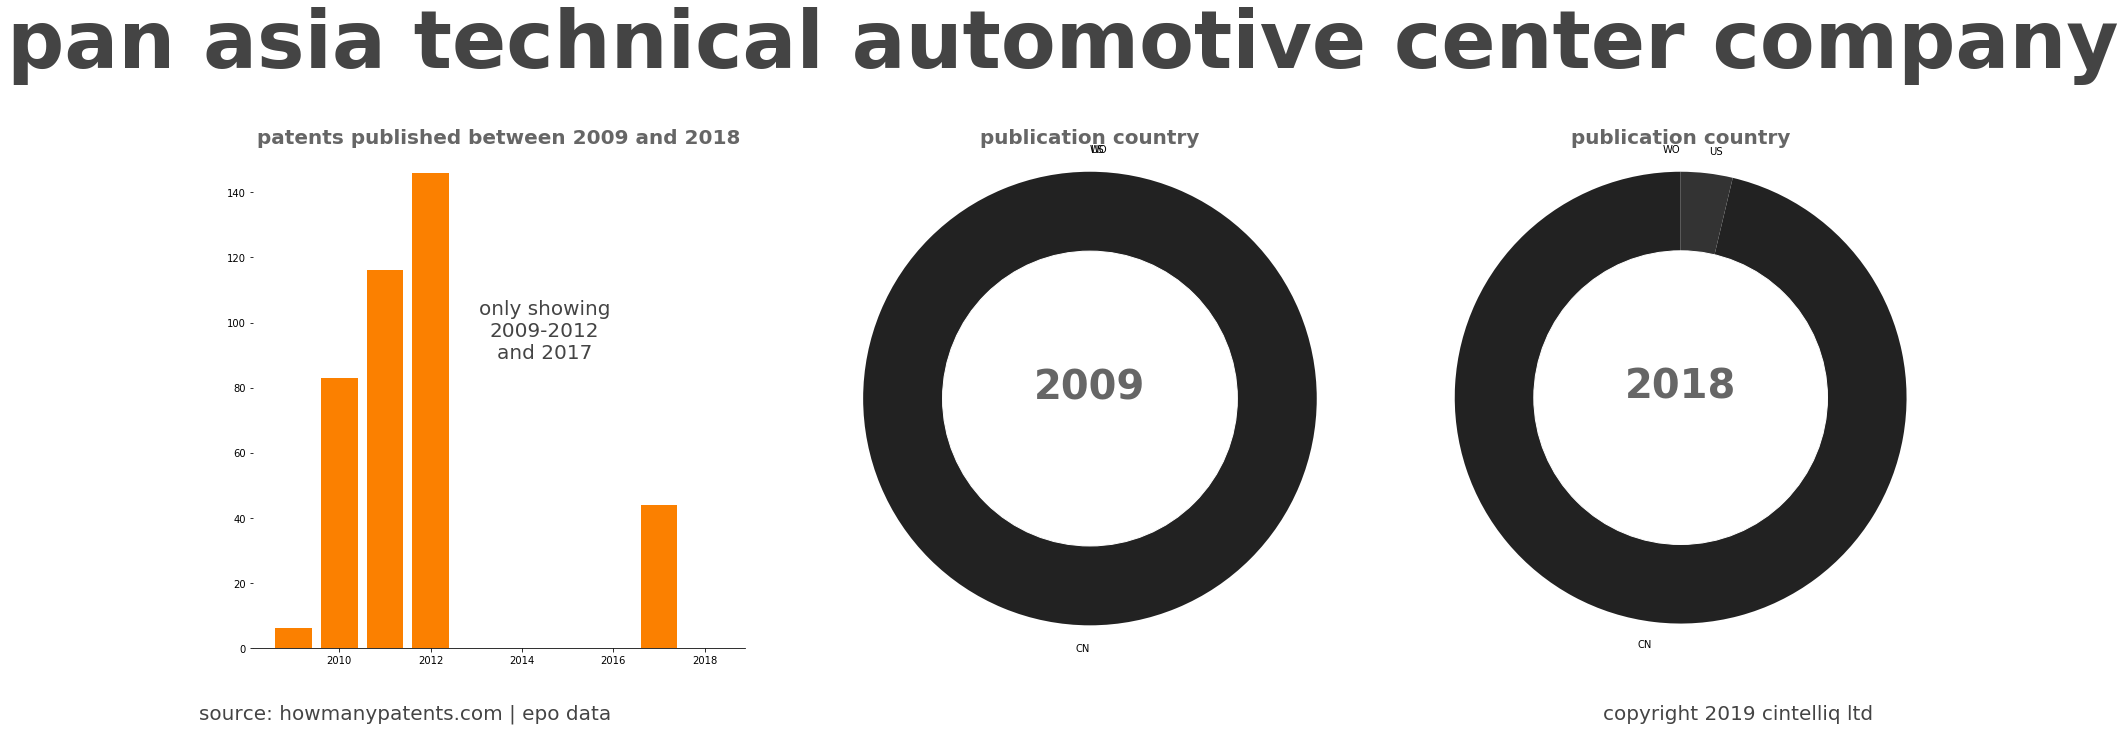 summary of patents for Pan Asia Technical Automotive Center Company